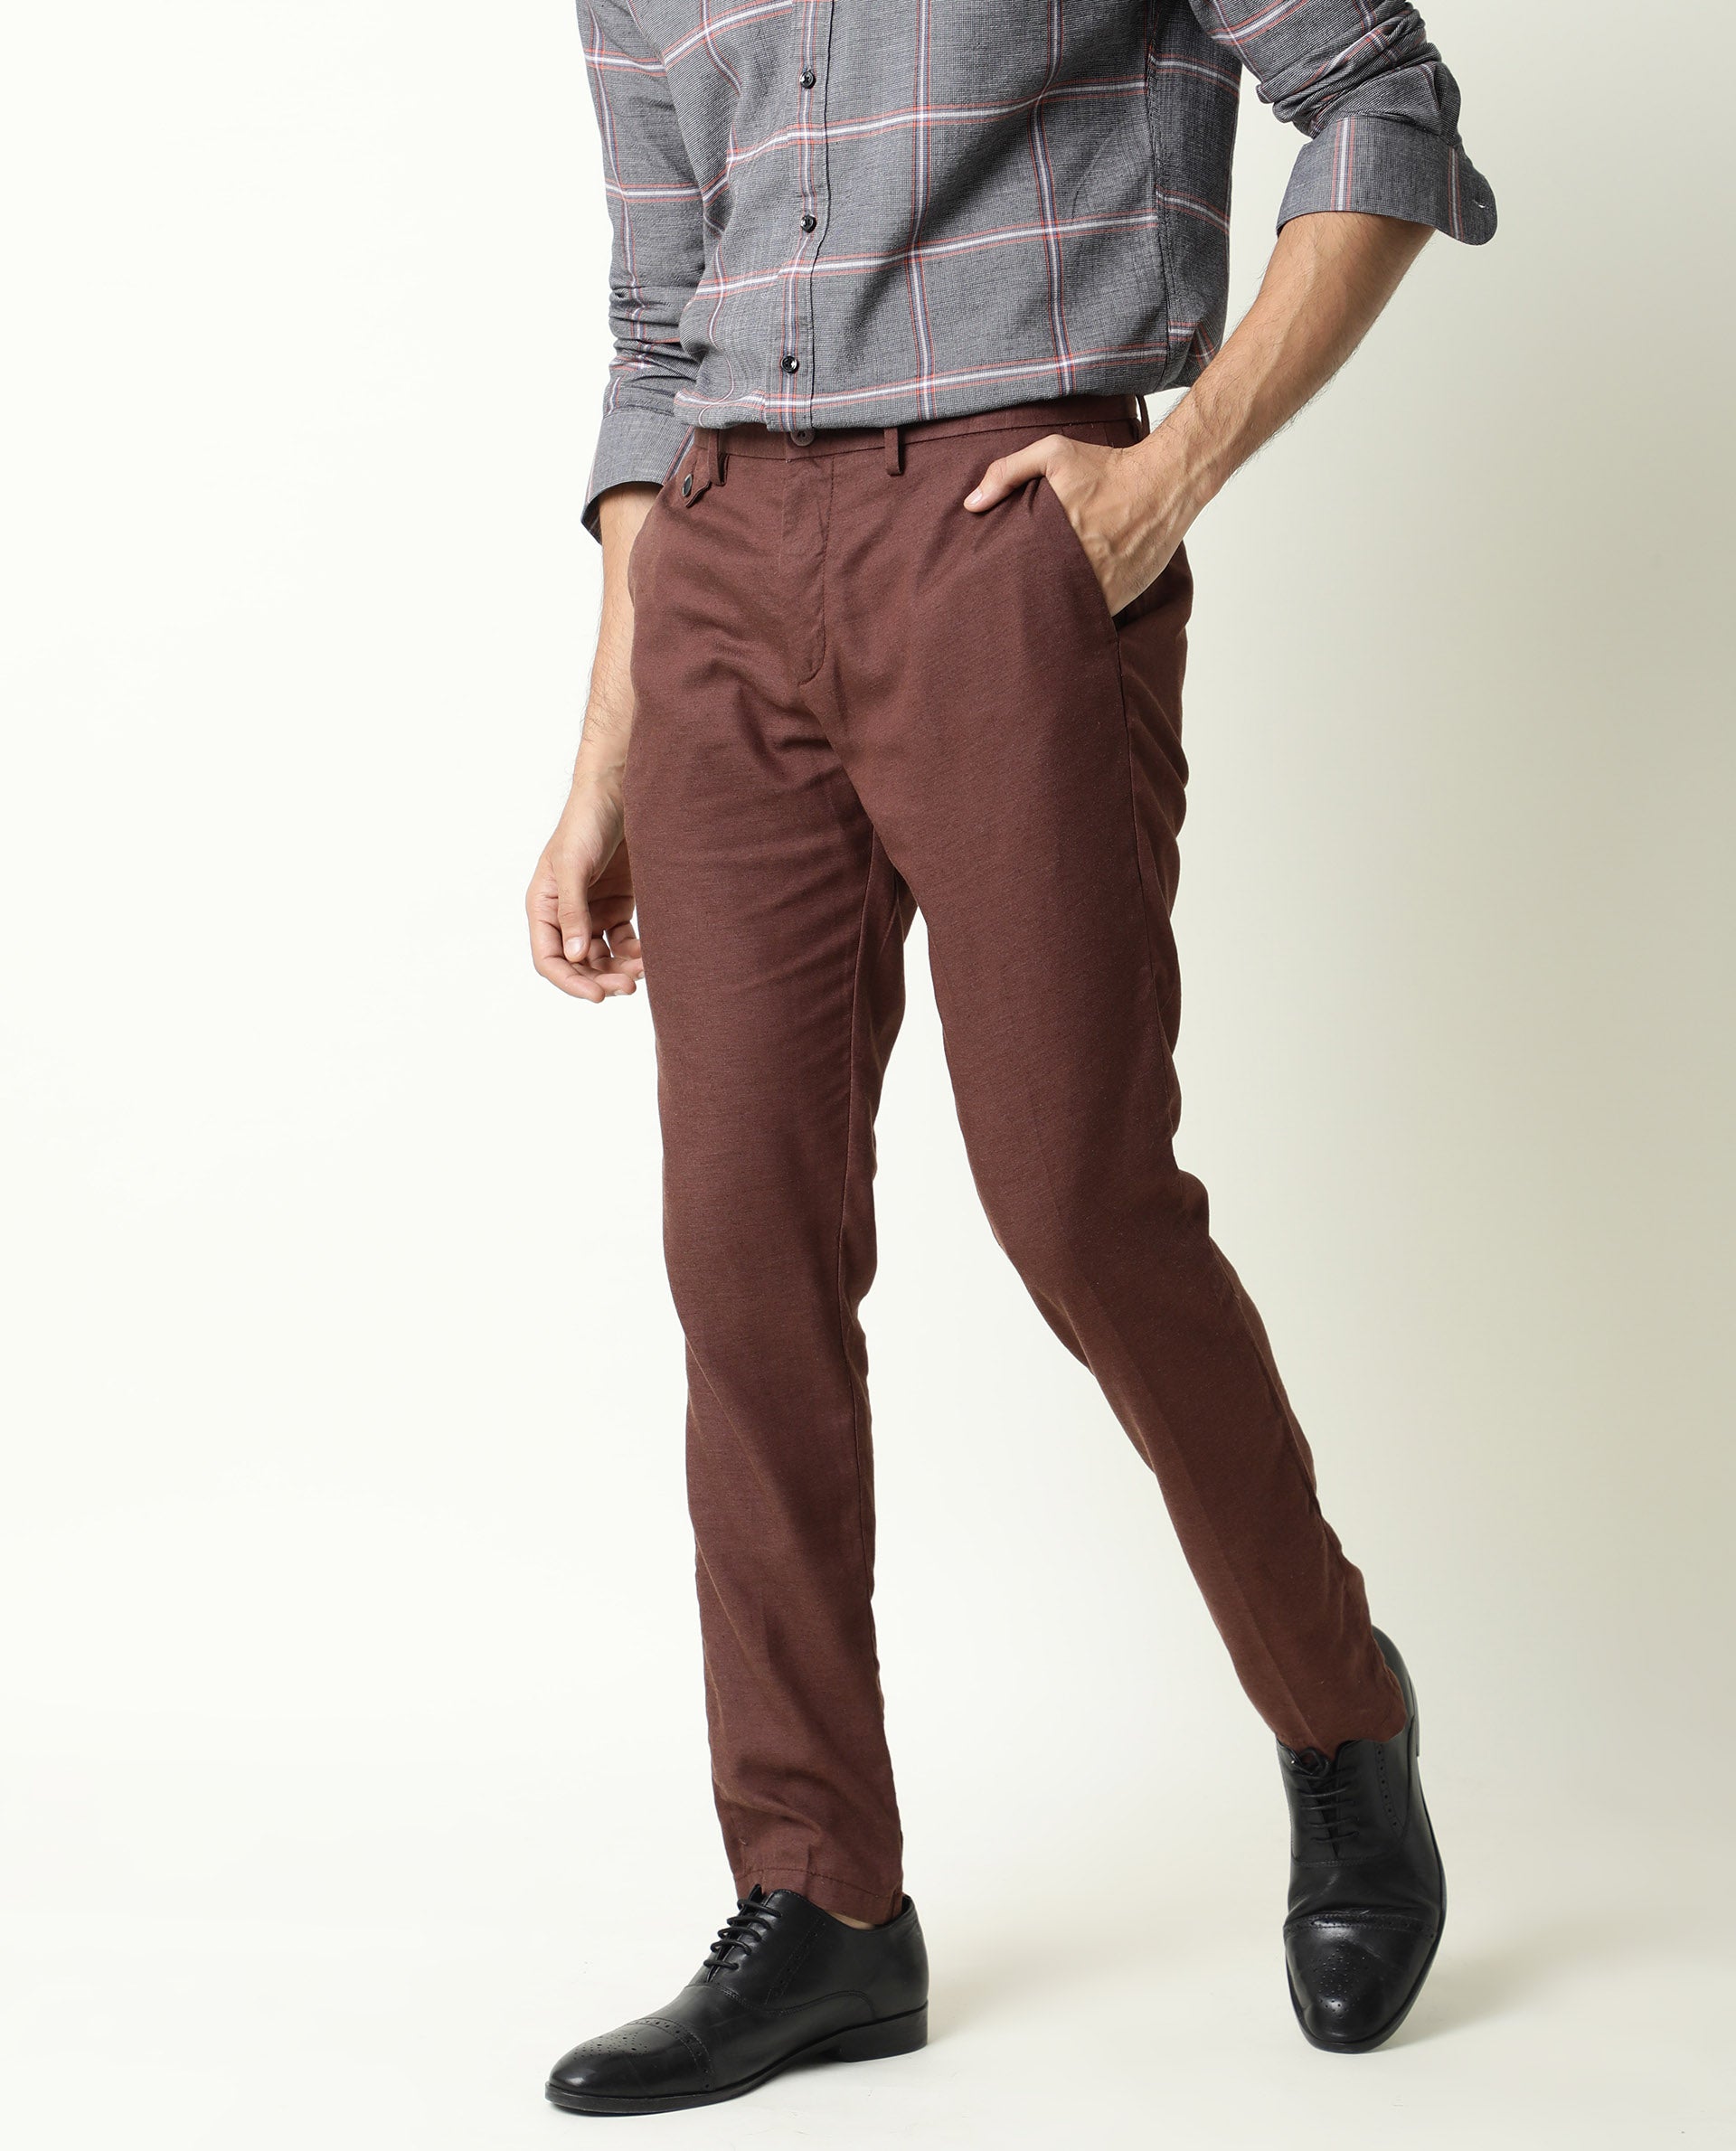 Burgundy Red Flat Front Corduroy Trousers  Peter Christian